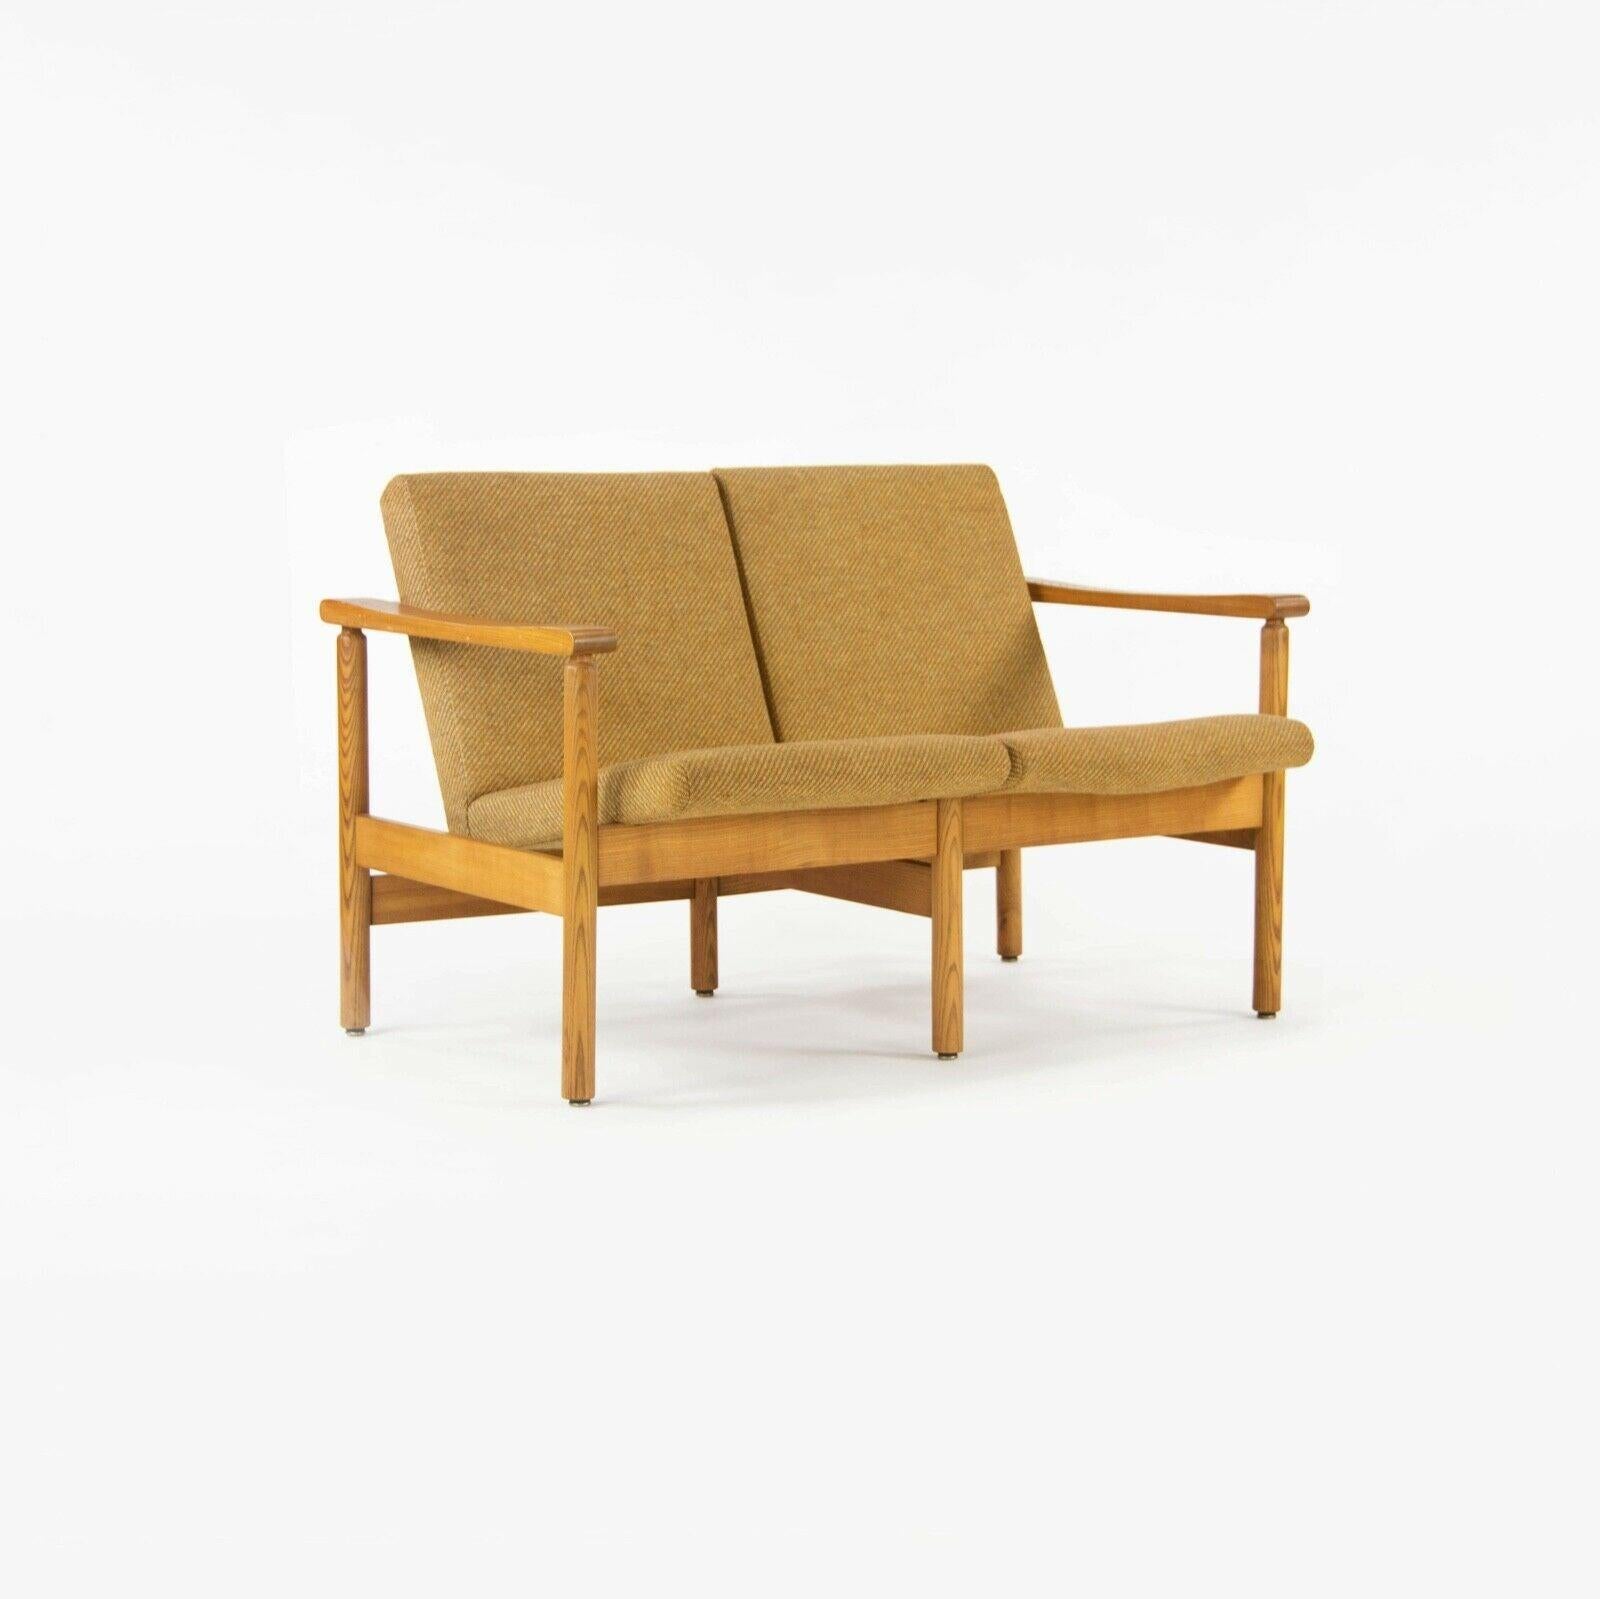 Listed for sale is a circa 1975 vintage Hans Krieks settee, produced by CI Designs of Boston, Massachusetts. This piece was acquired by a Boston-based architect, directly from the CI Designs showroom.

Hans Krieks Associates was a New York